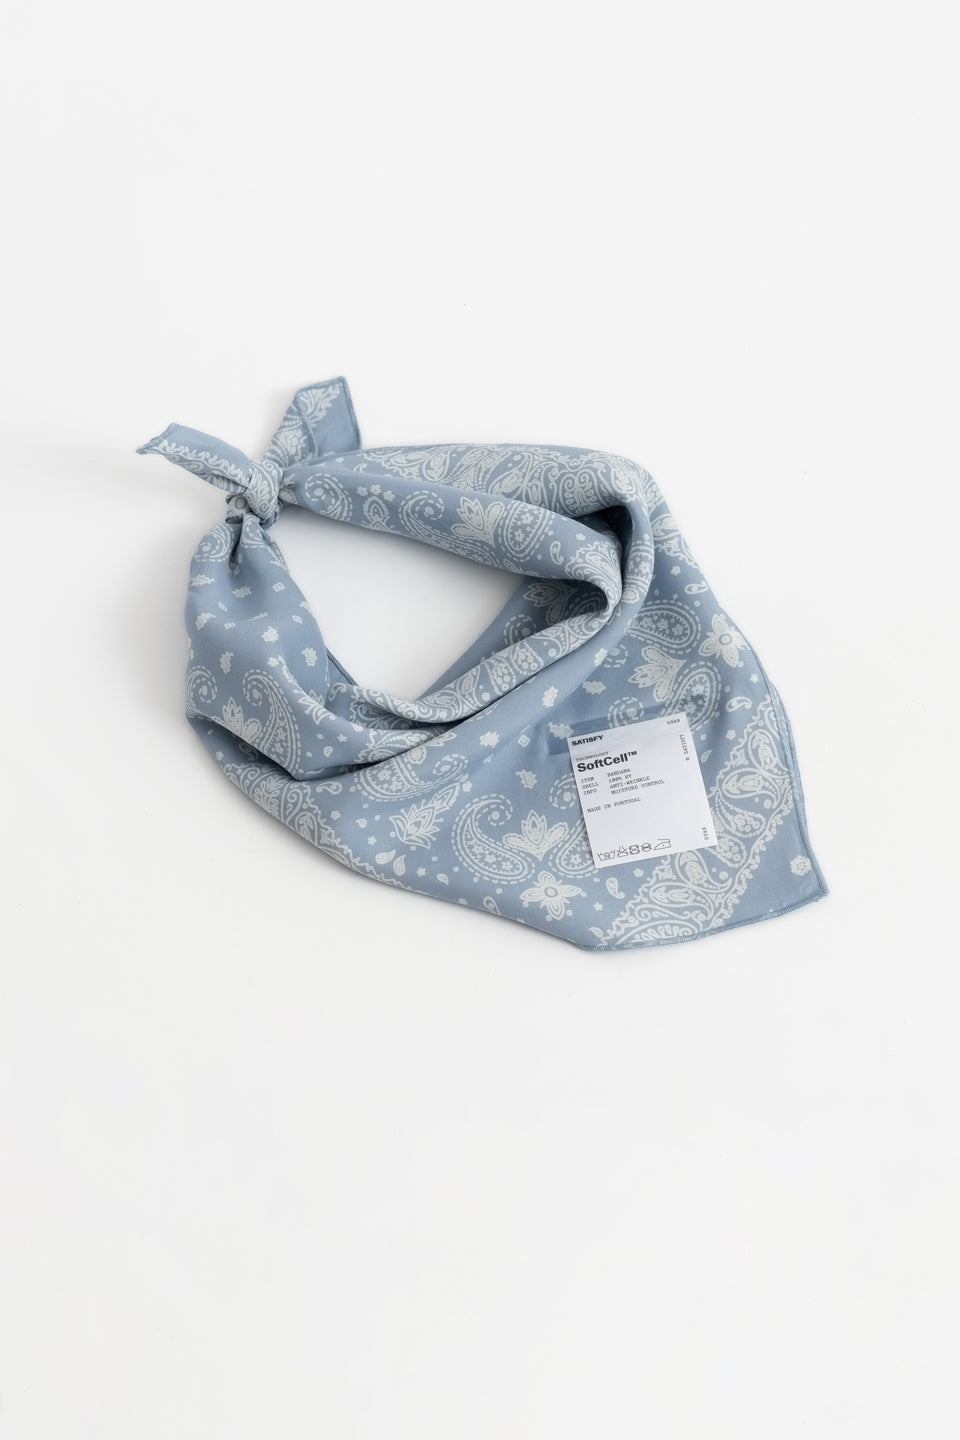 SATISFY men's running apparel France SoftCell™ Bandana Pale Blue Calculus online shop Canada